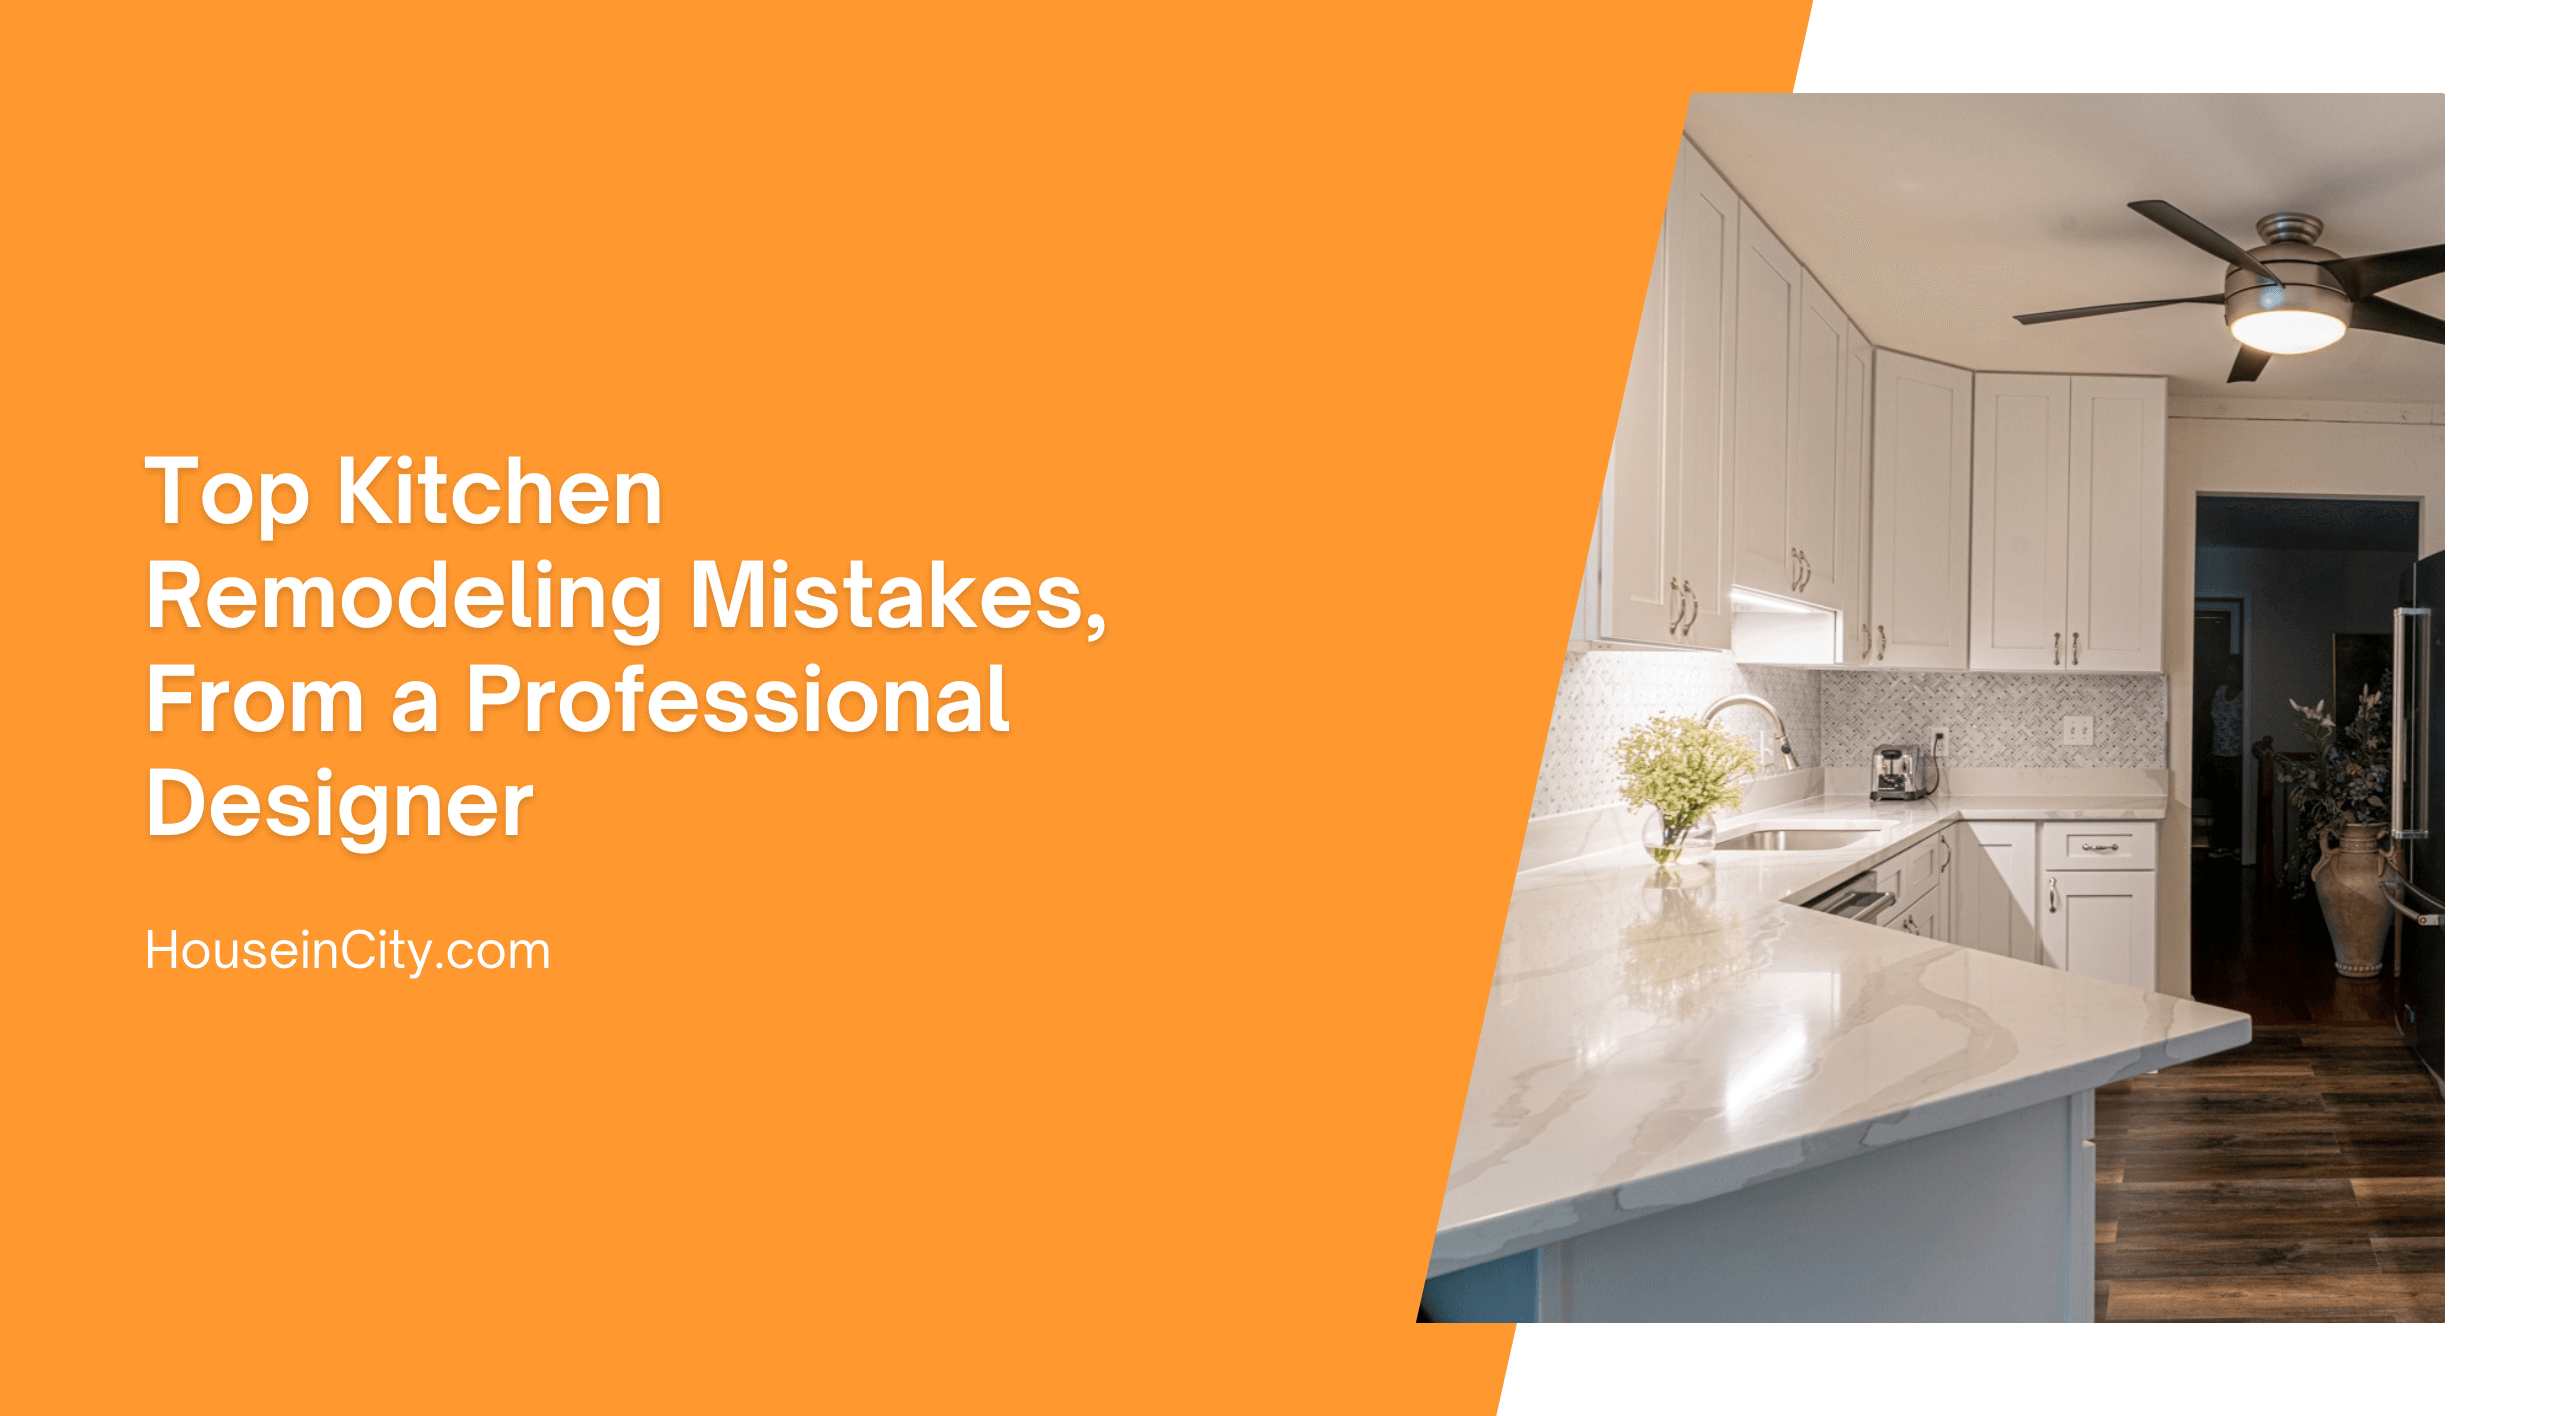 Top Kitchen Remodeling Mistakes, From a Professional Designer